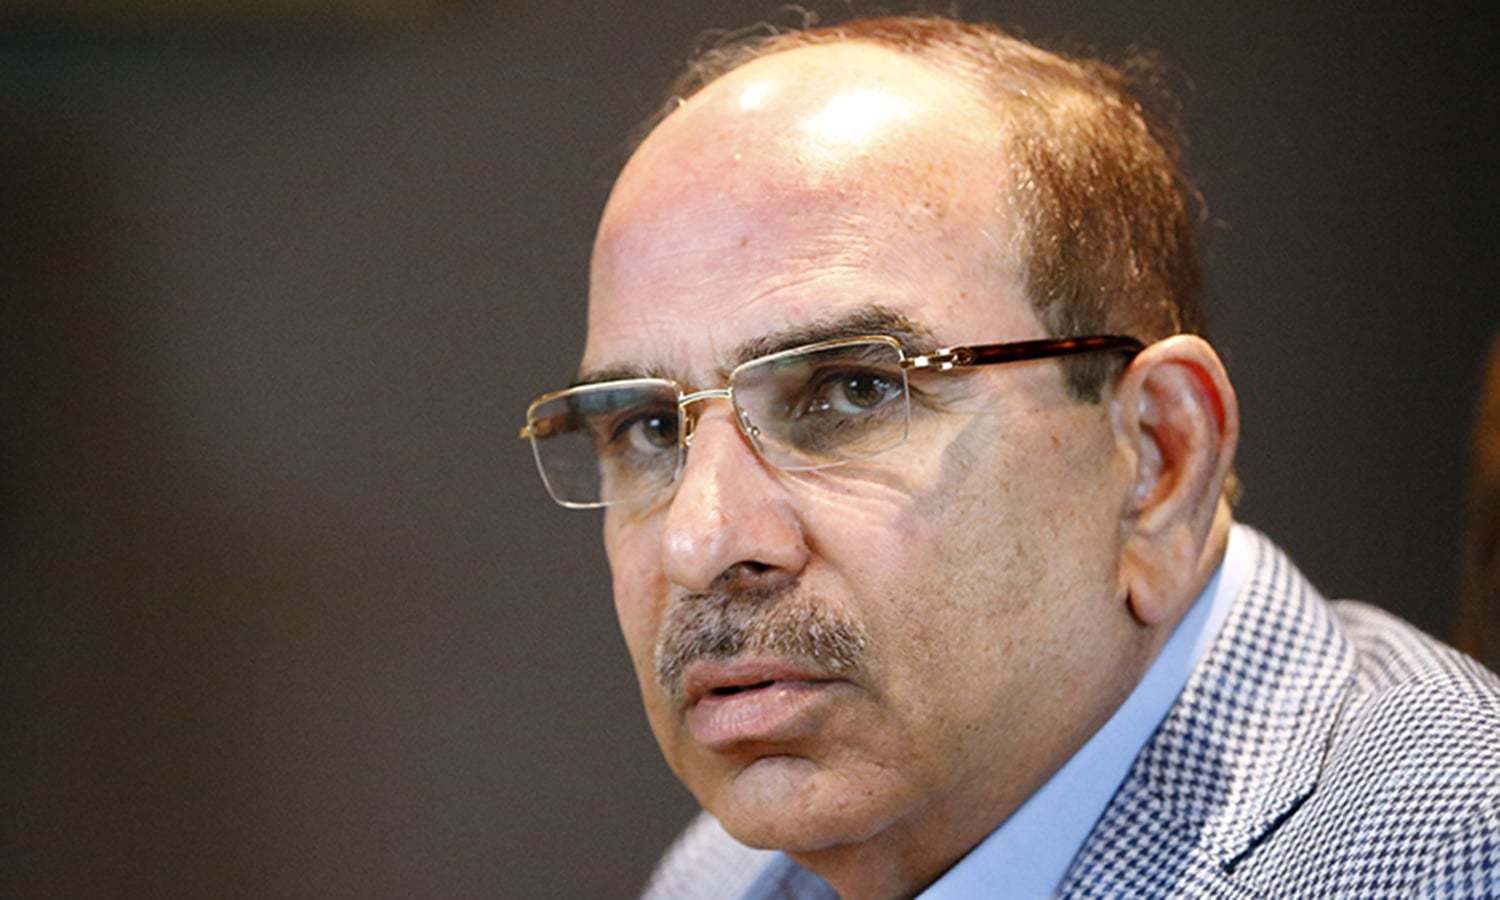 Pakistani property developer Malik Riaz Hussain speaks with a Reuters correspondent during an interview at his office in Bahria Town on the outskirts of Islamabad, Pakistan March 10, 2016. To match Interview PAKISTAN-PROPERTY/TYCOON     REUTERS/Caren Firouz